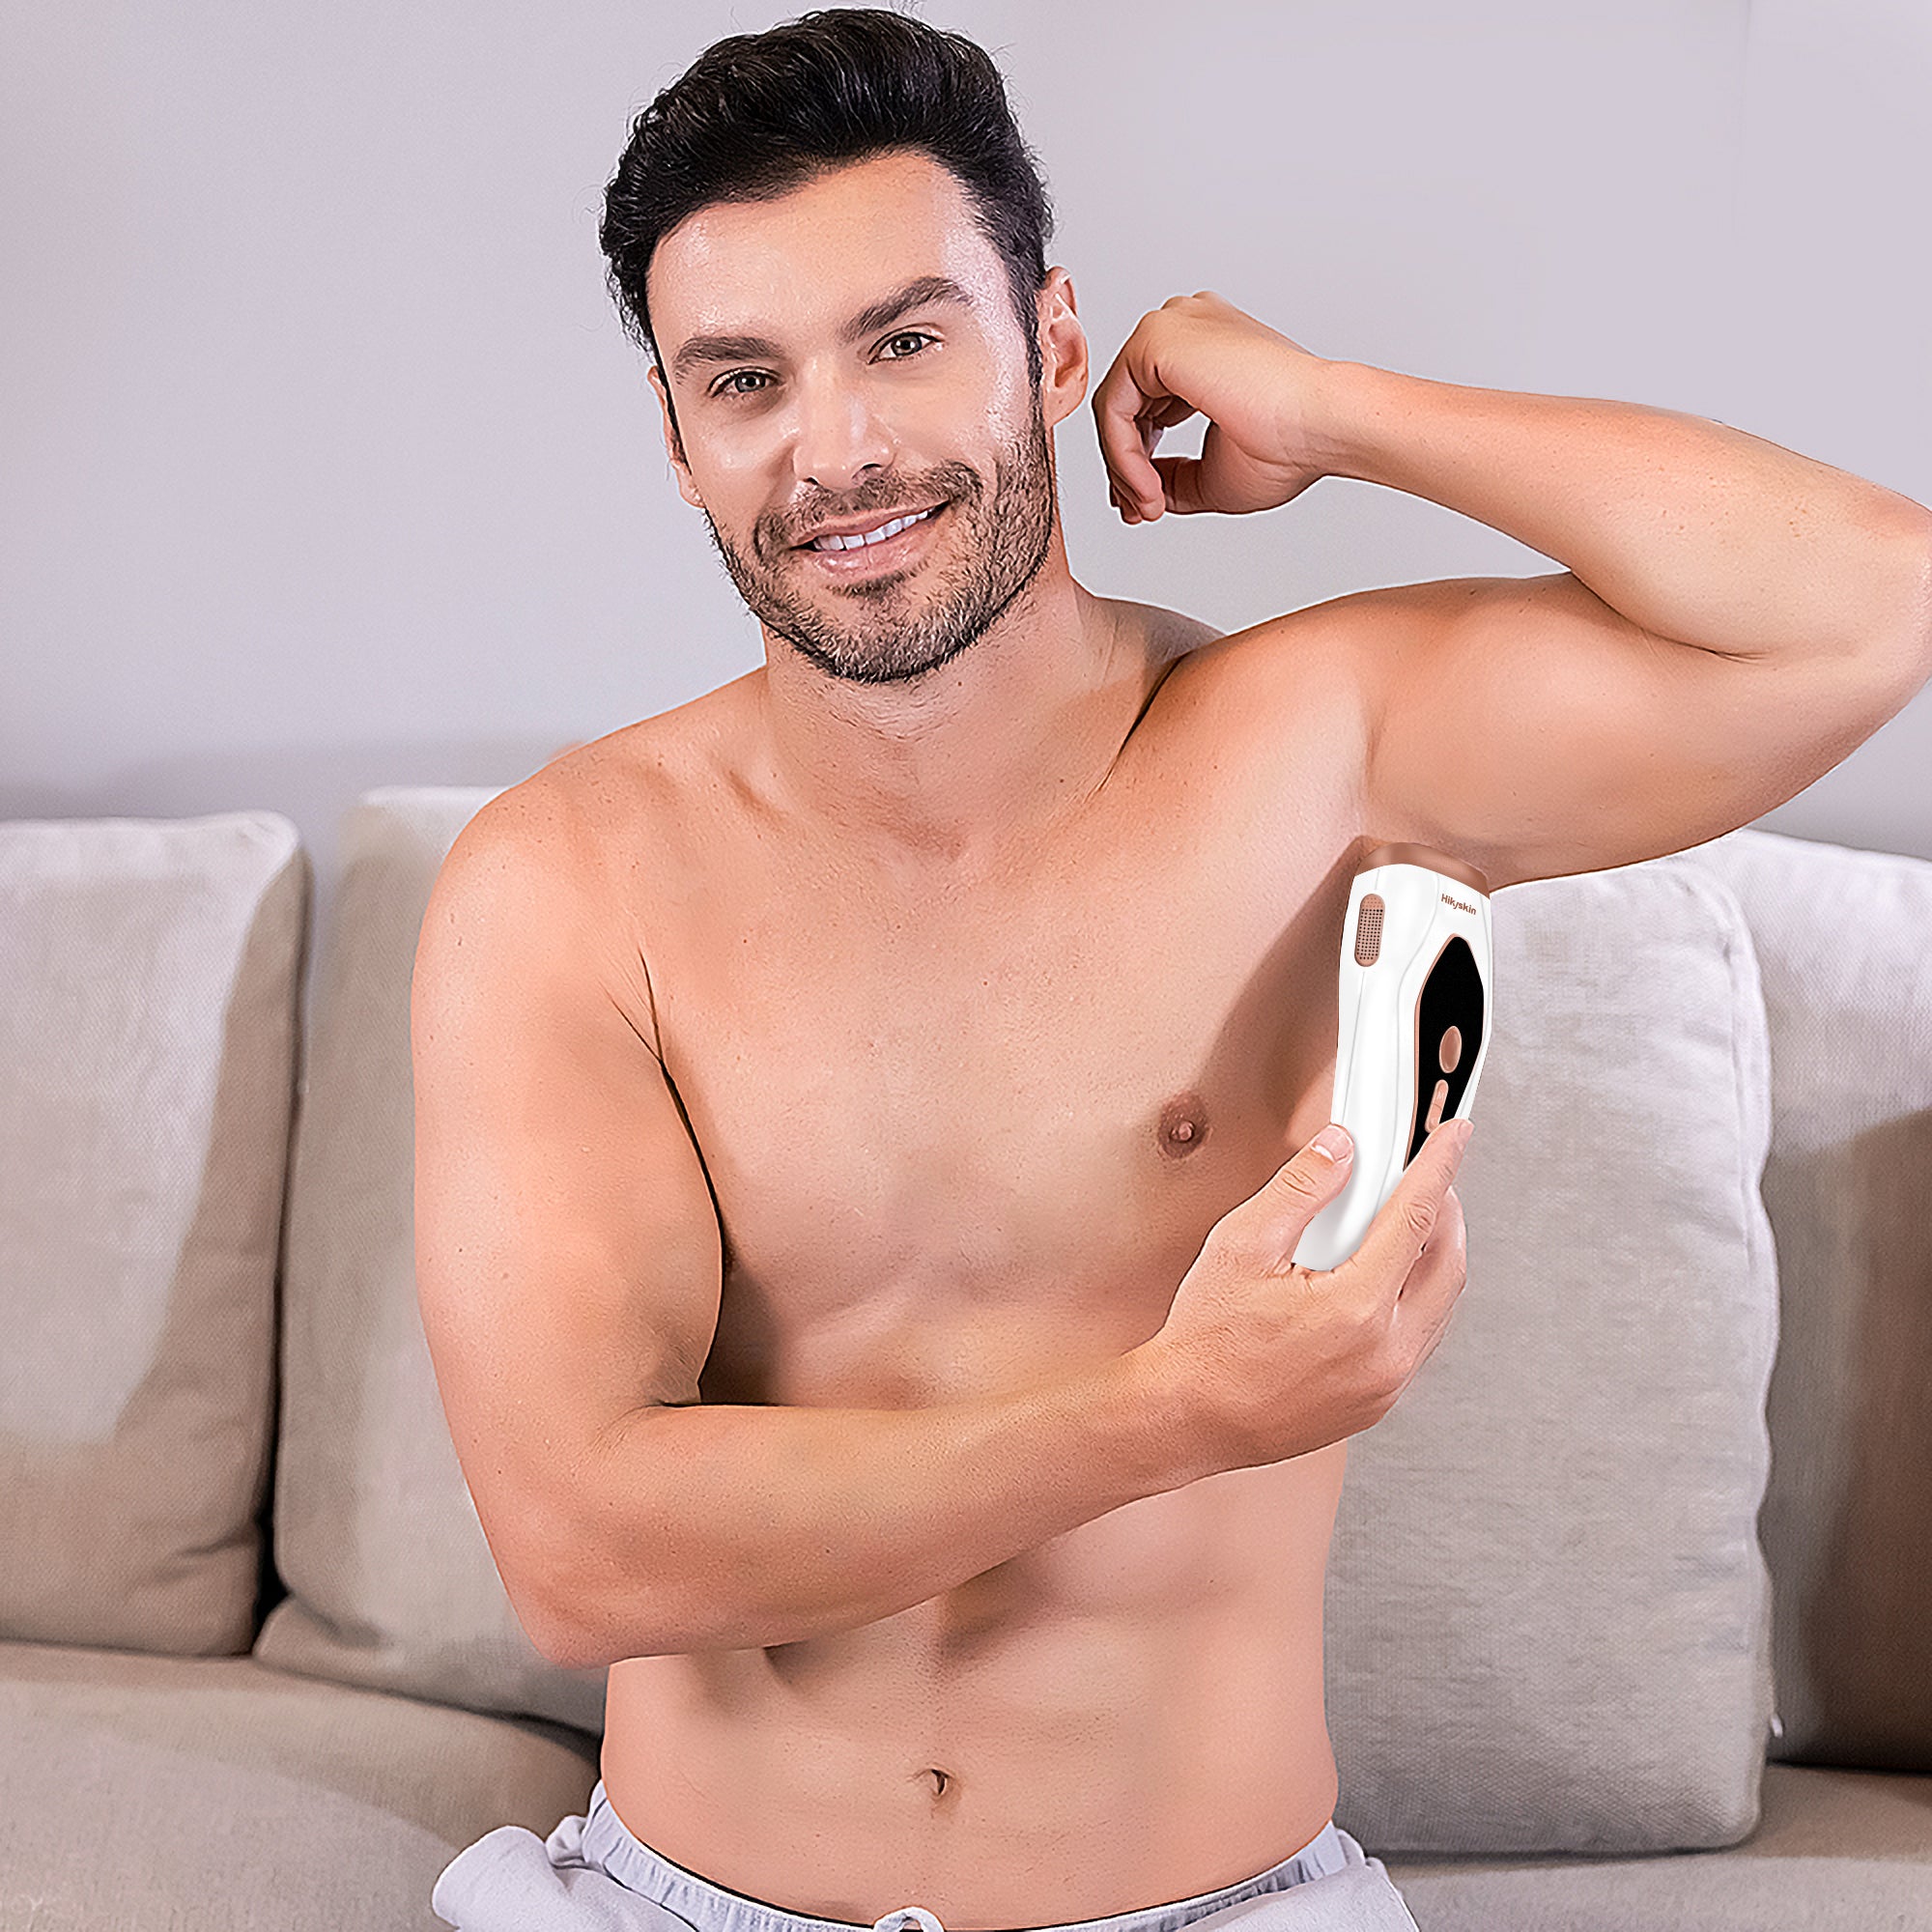 Hikyskin Omni Three-In-One Cooling Hair Removal Device